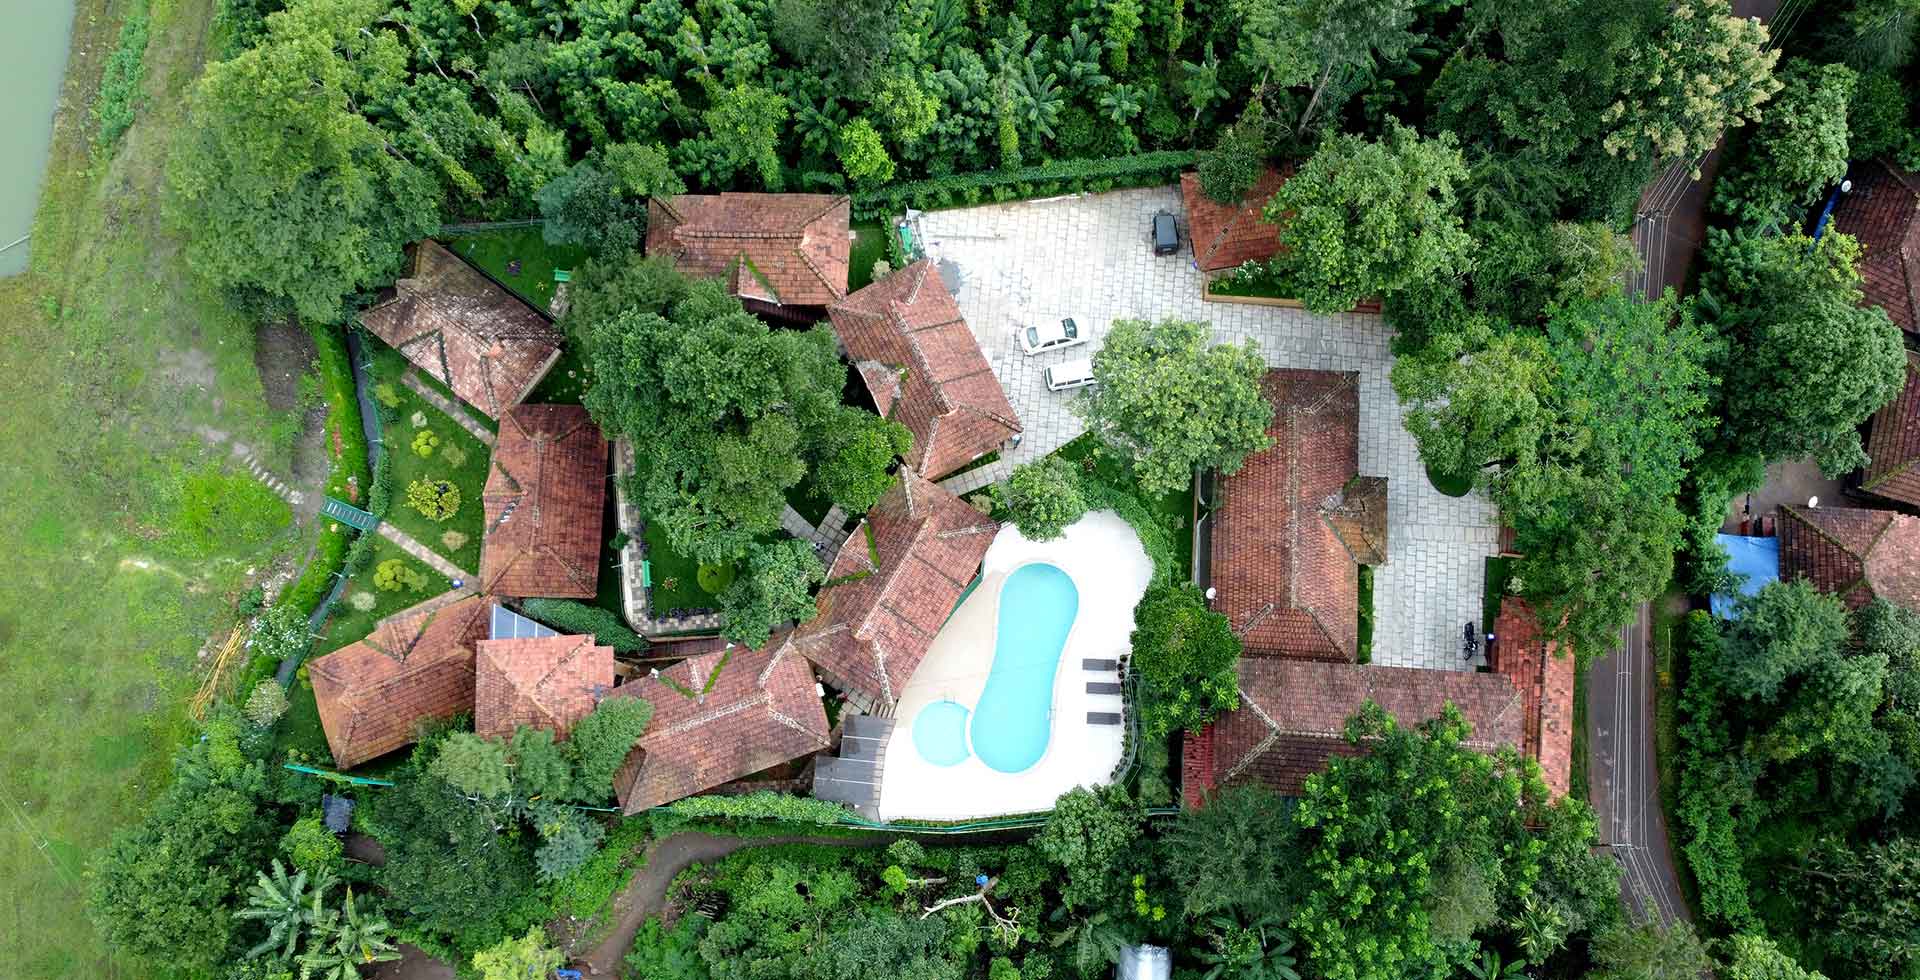 A high-angle view of Mysterymaze resort, showing the pool, cottages, and trees